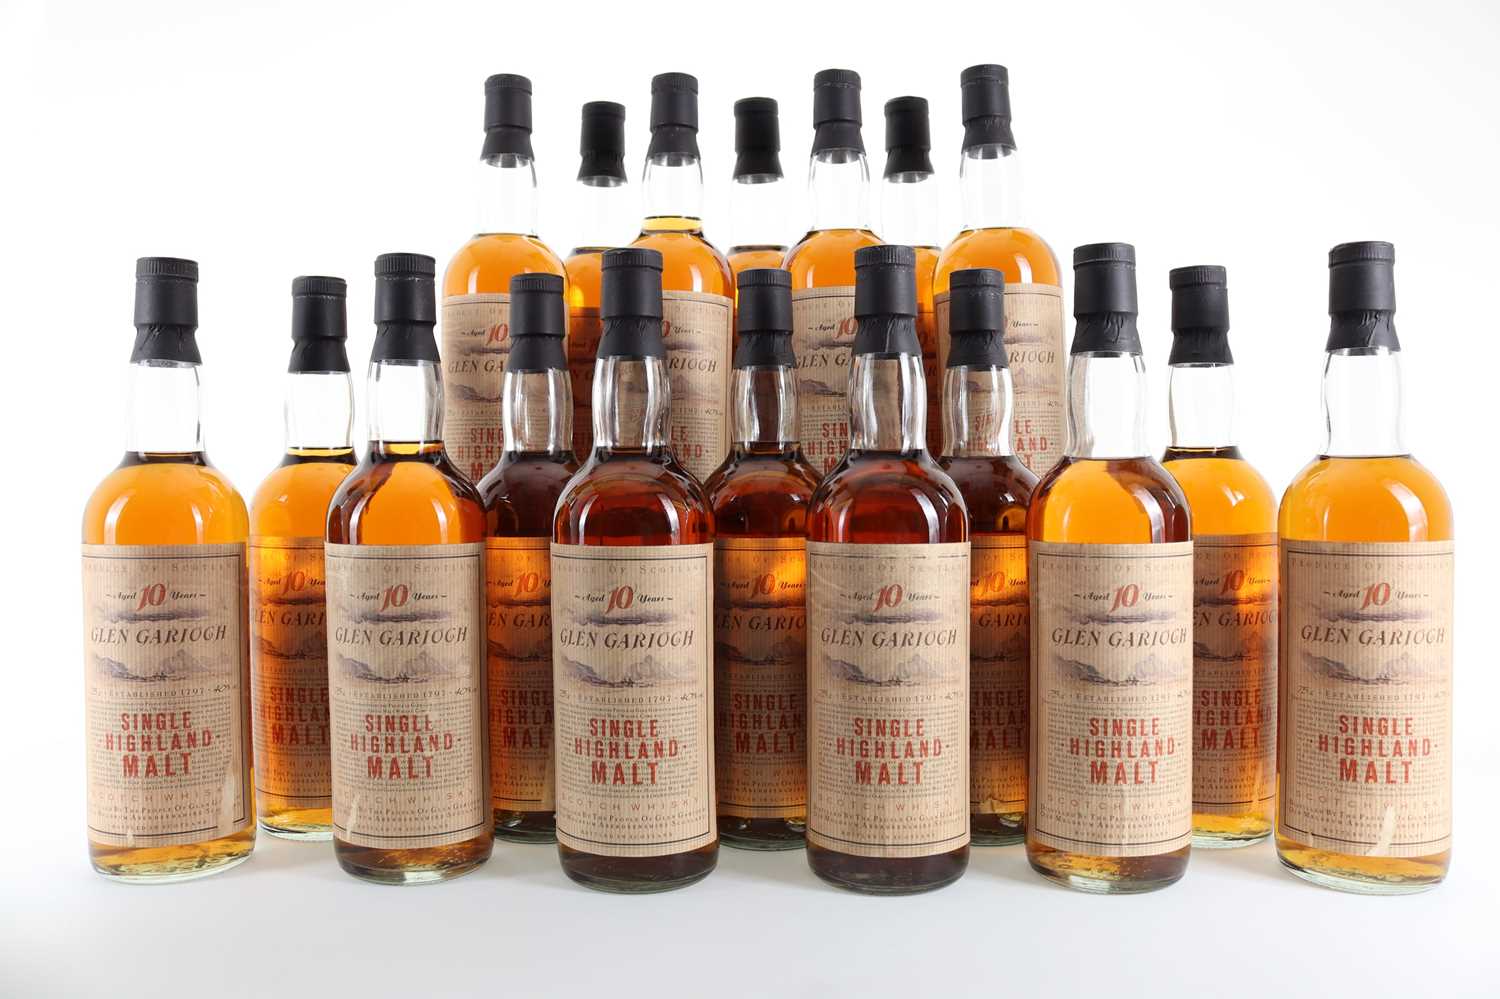 Lot 160 - 18 BOTTLES OF GLEN GARIOCH 10 YEAR OLD 1980S 75CL - COMPLETE COLLECTION OF WHISKY PRODUCTION LABELS